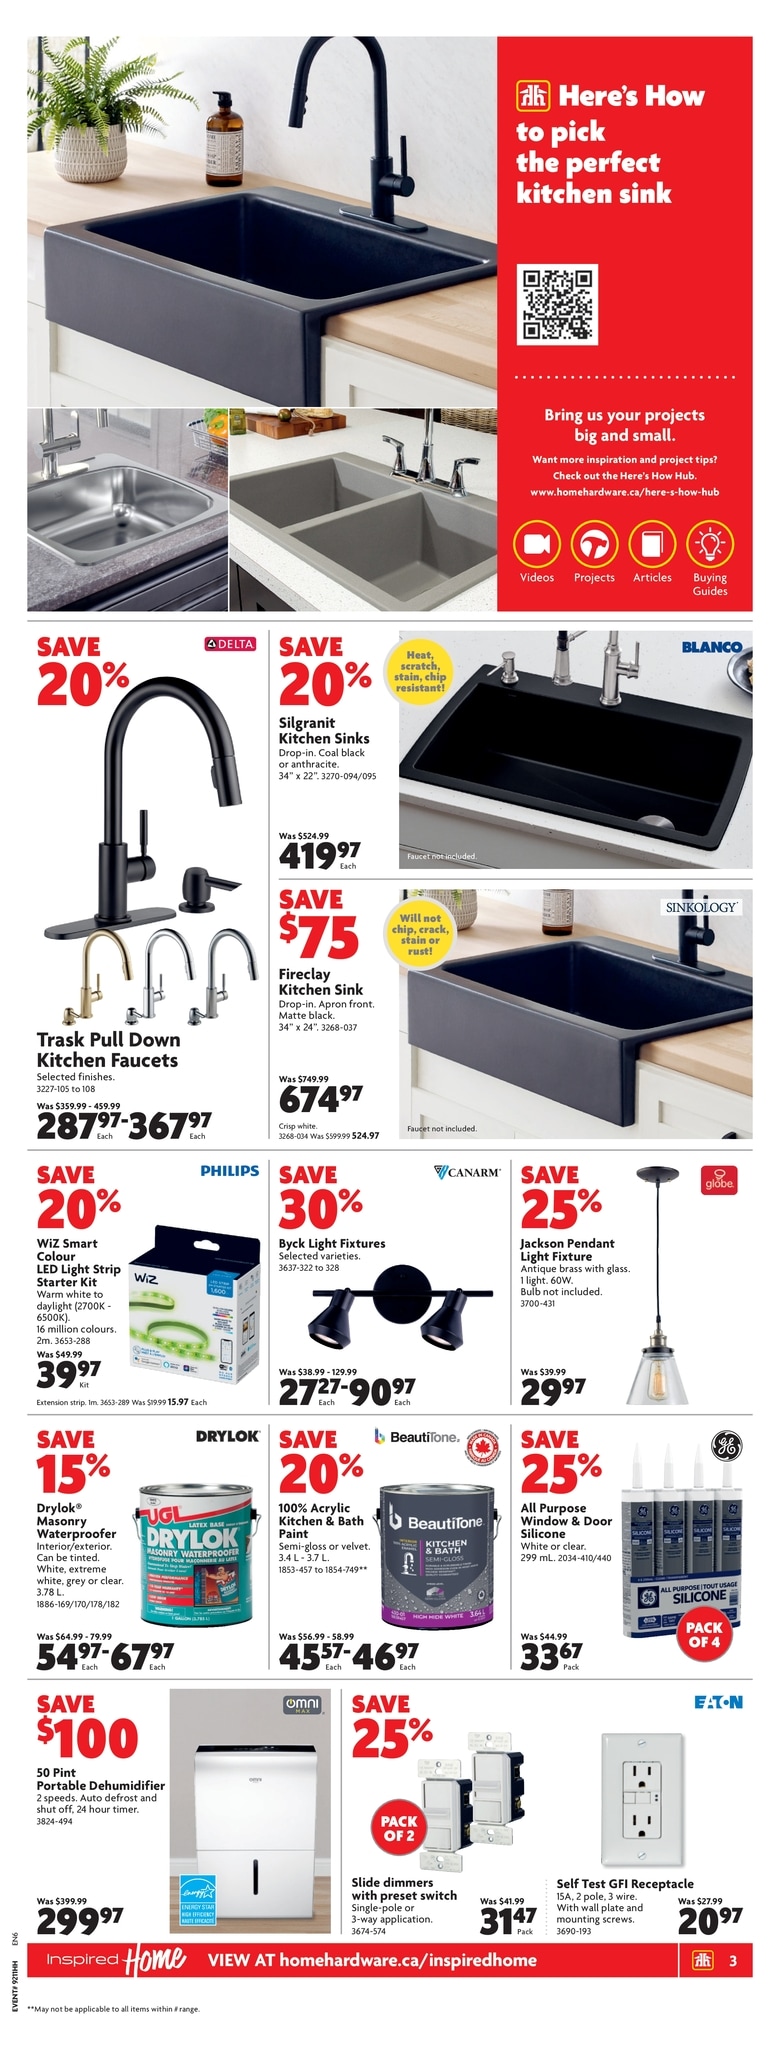 Home Hardware - Weekly Flyer Specials - Page 4